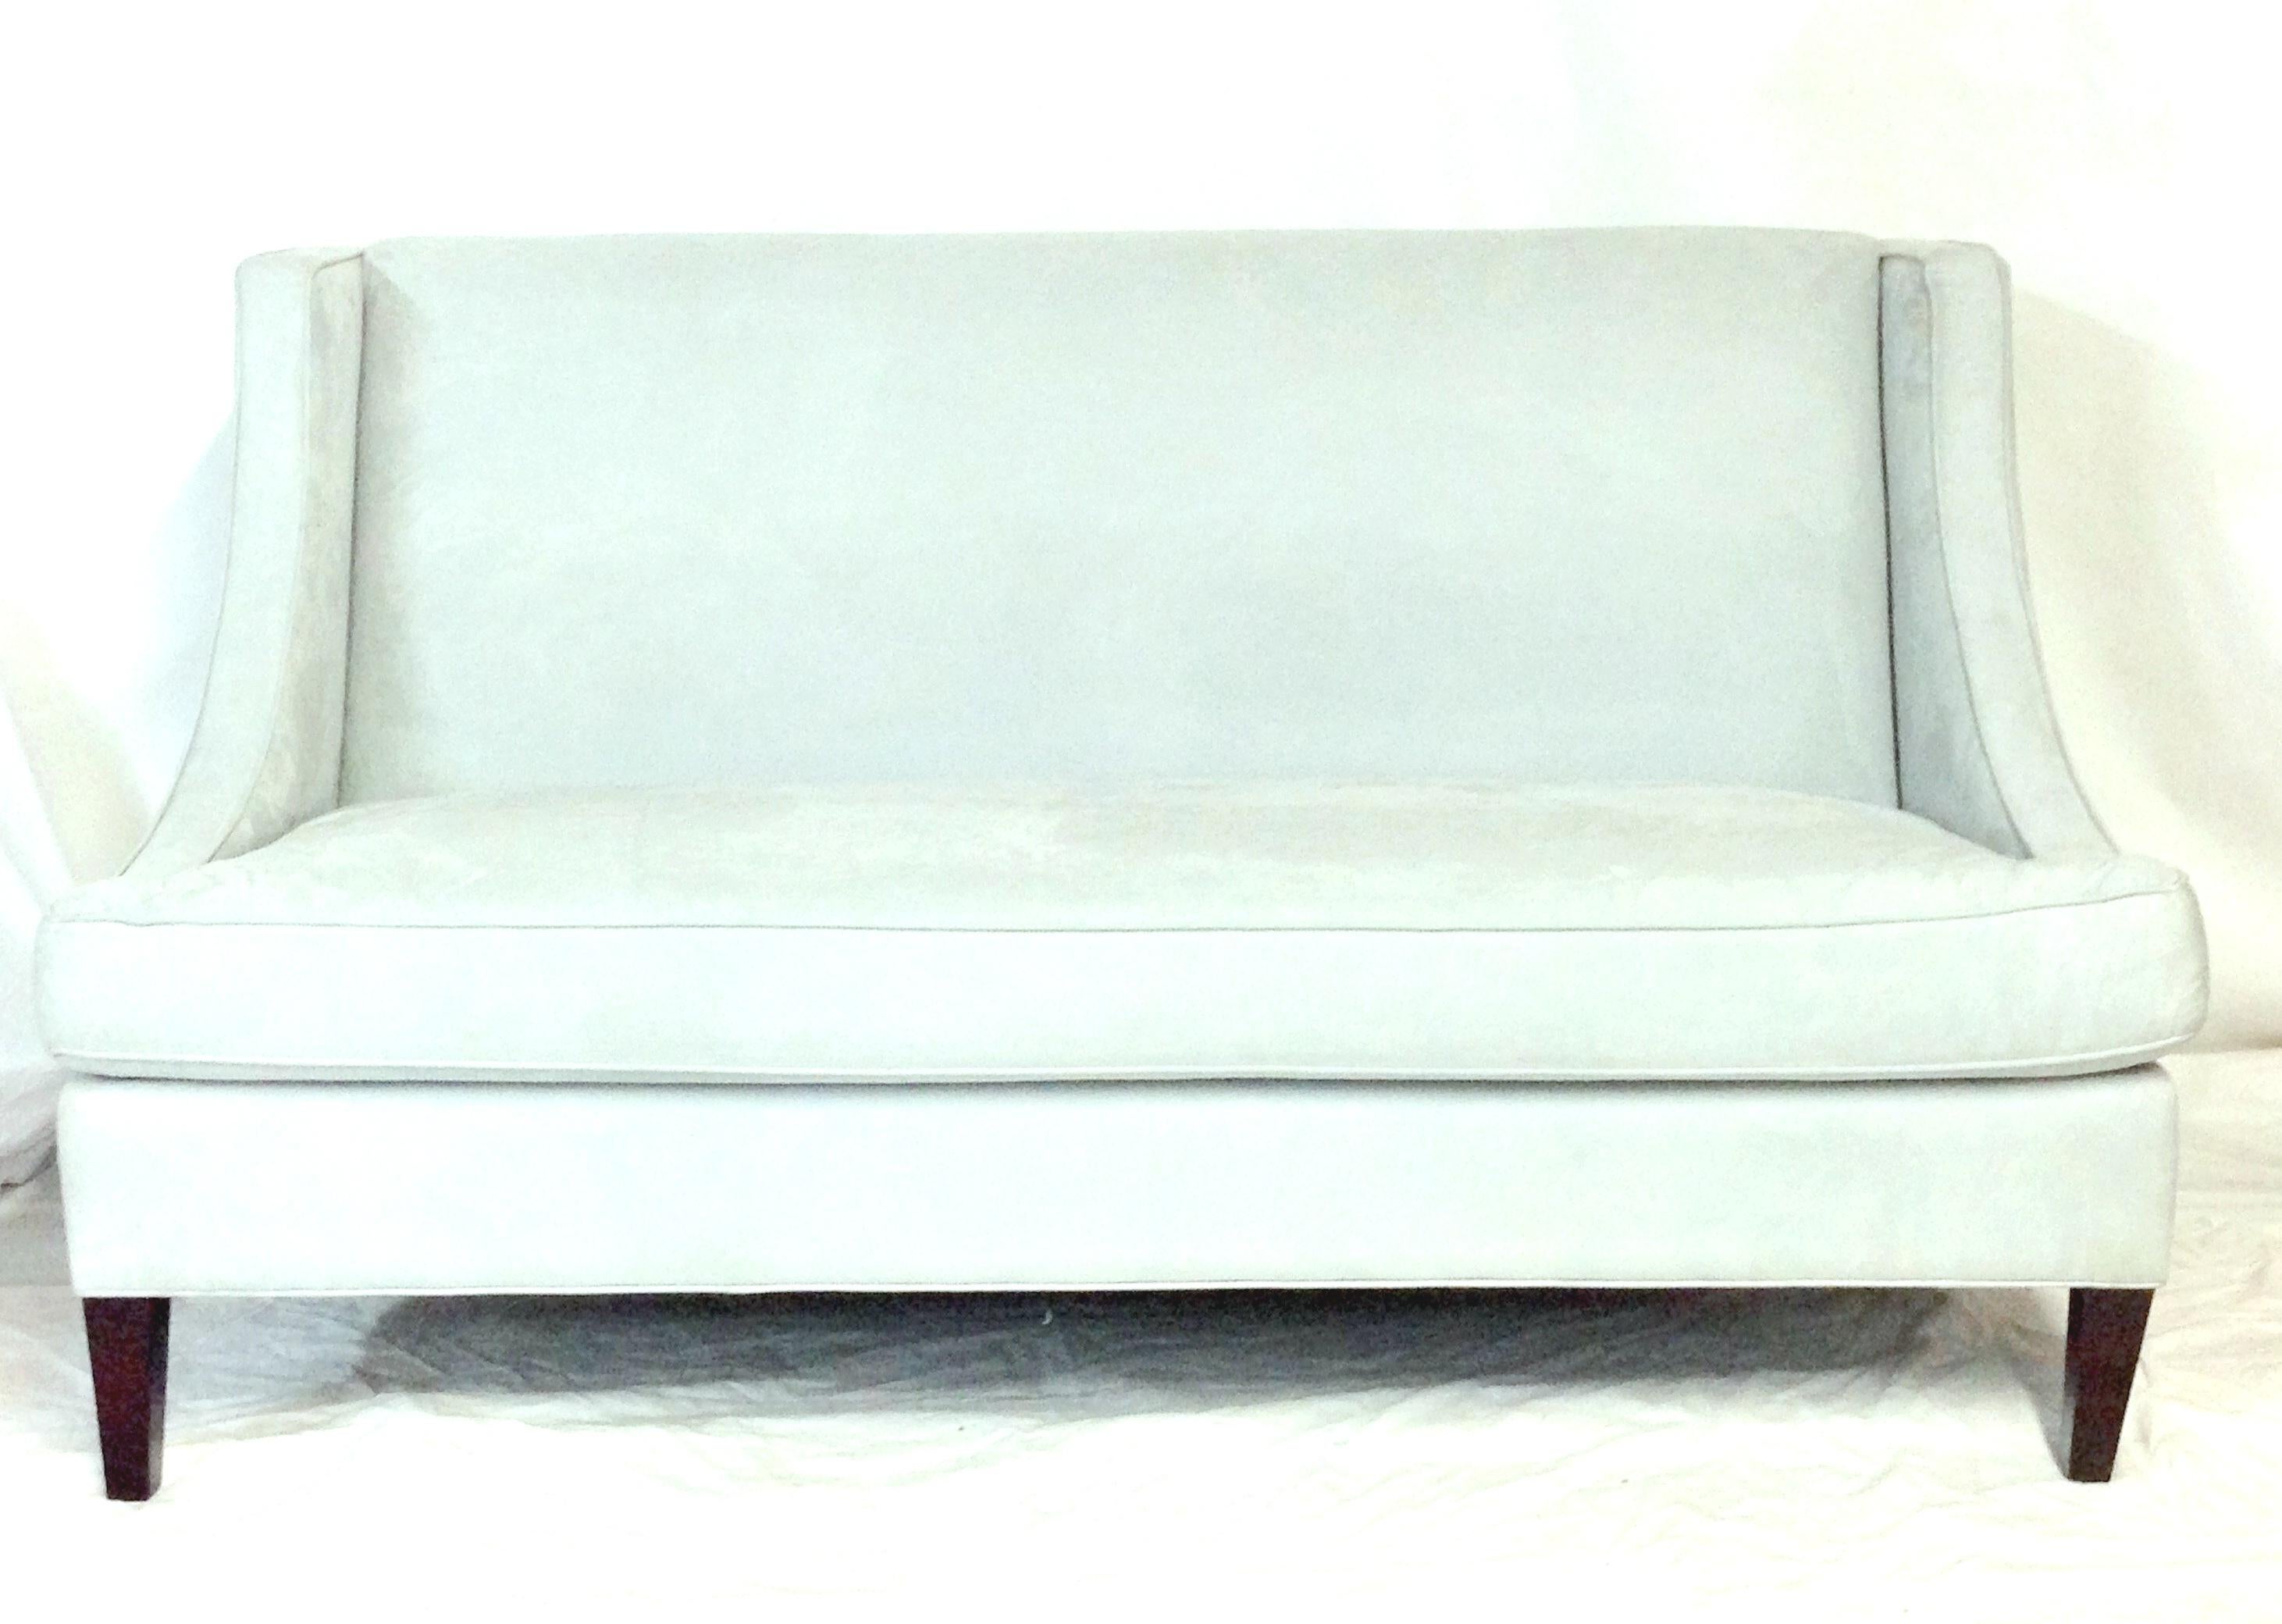 20th Century American Made Suede Upholstered Settee  In Good Condition For Sale In West Palm Beach, FL